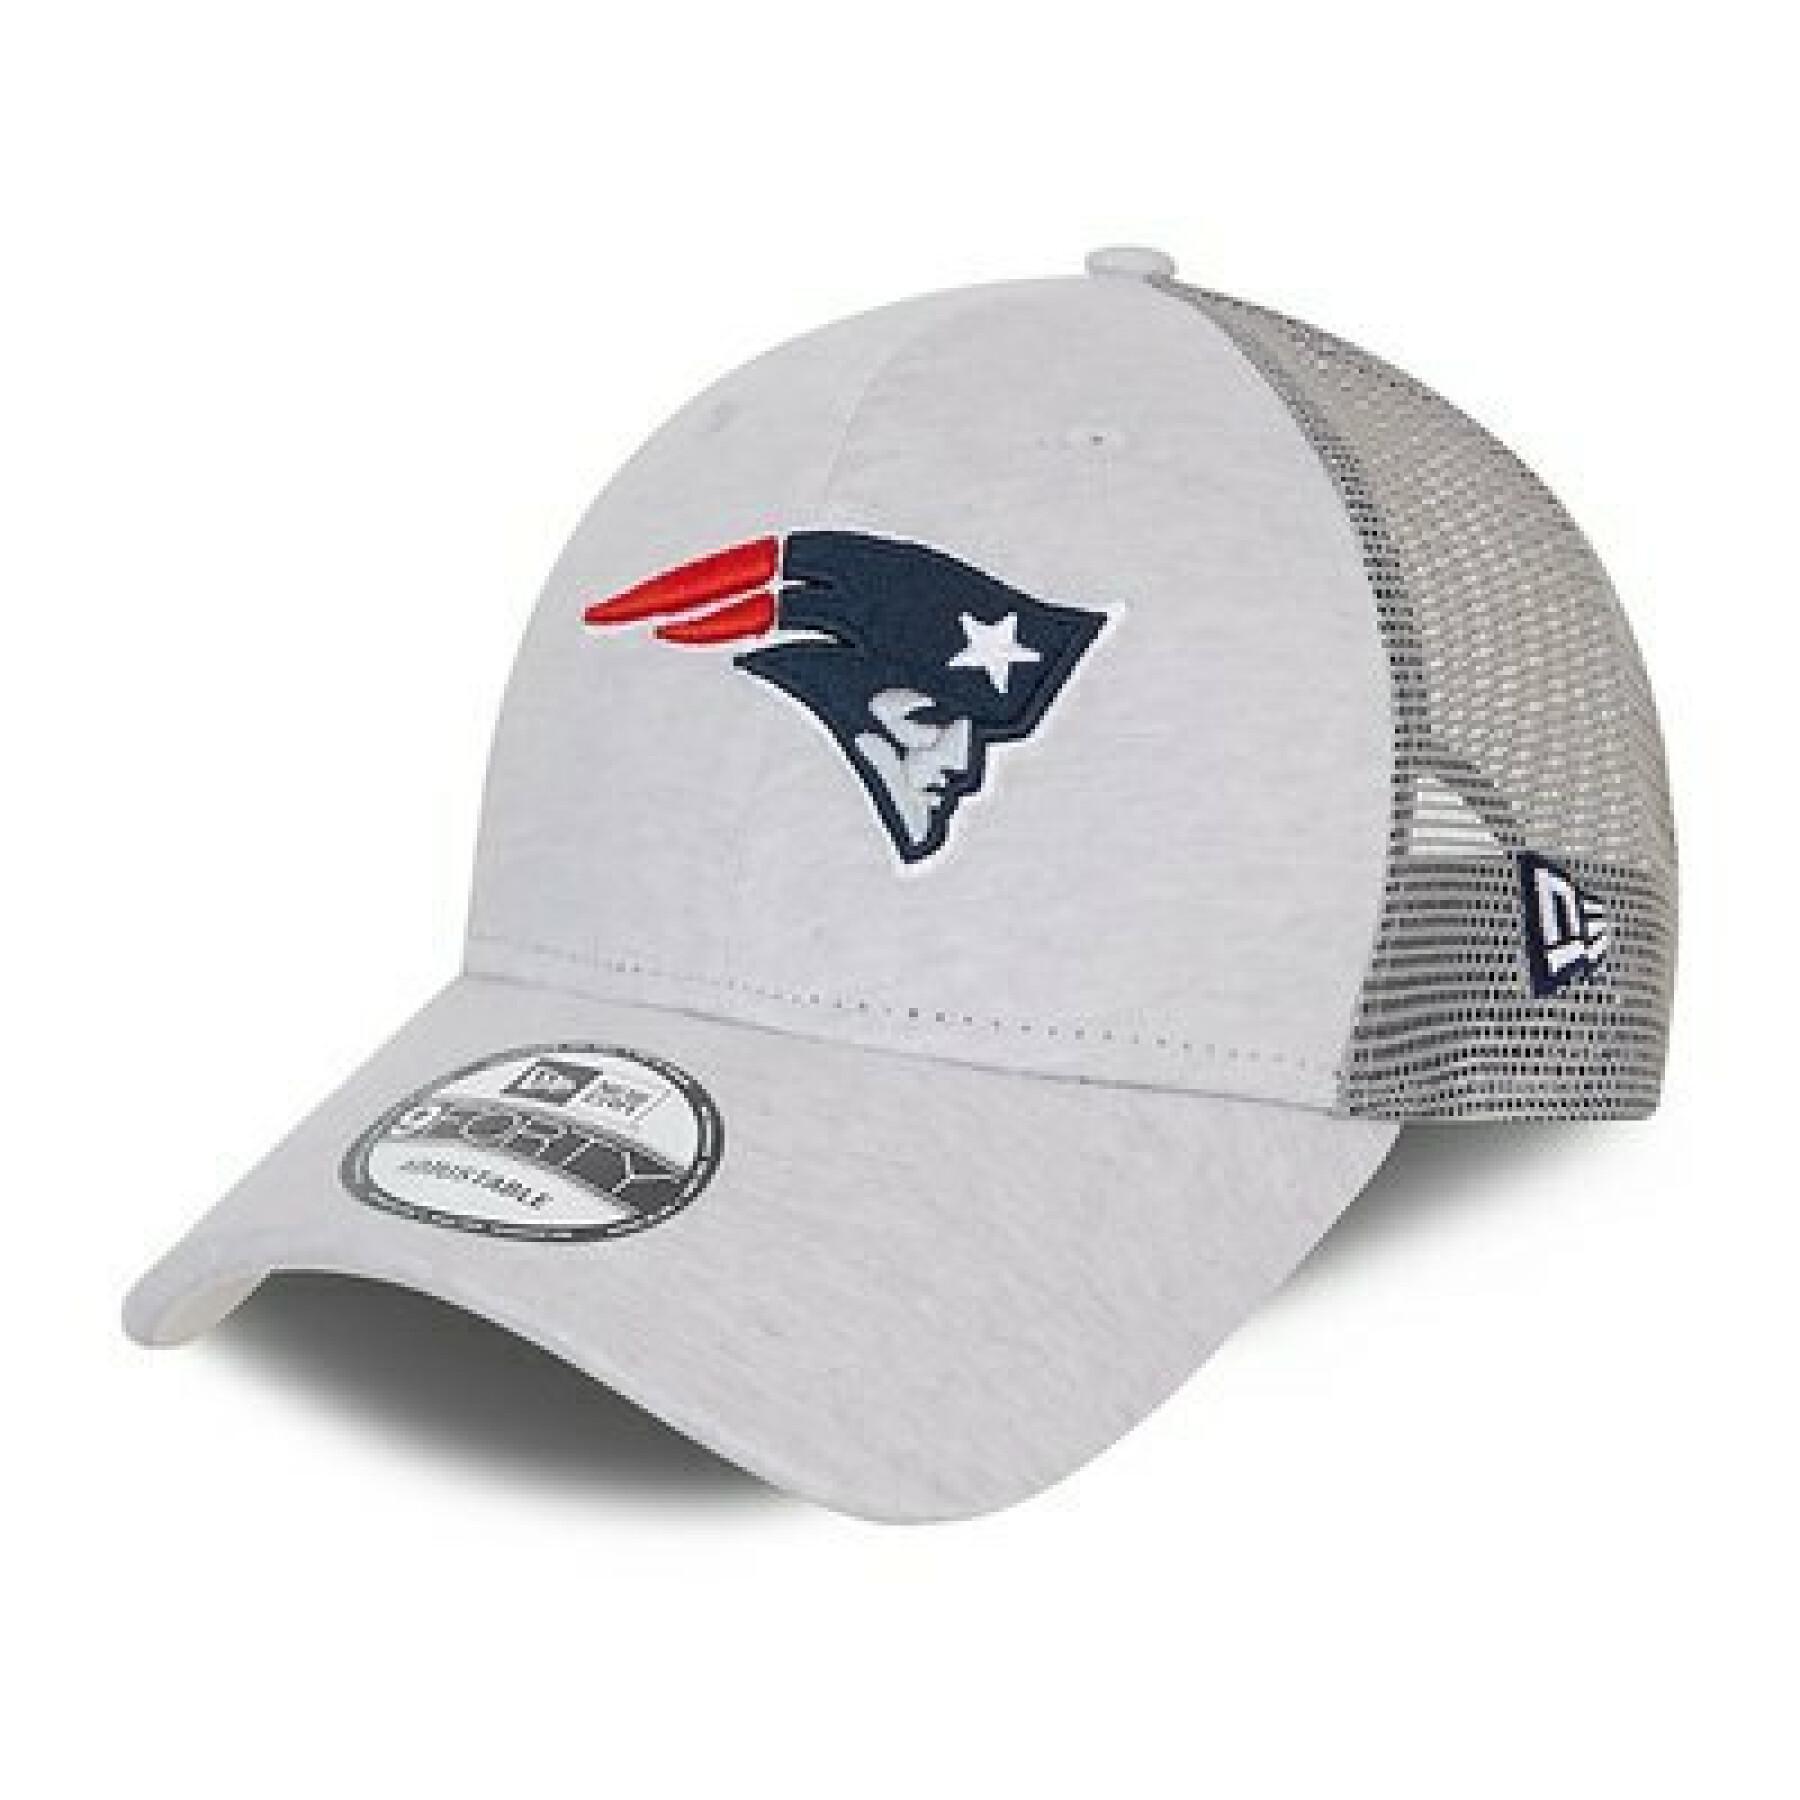 Casquette New Era NFL New England Patriots trucker 9forty